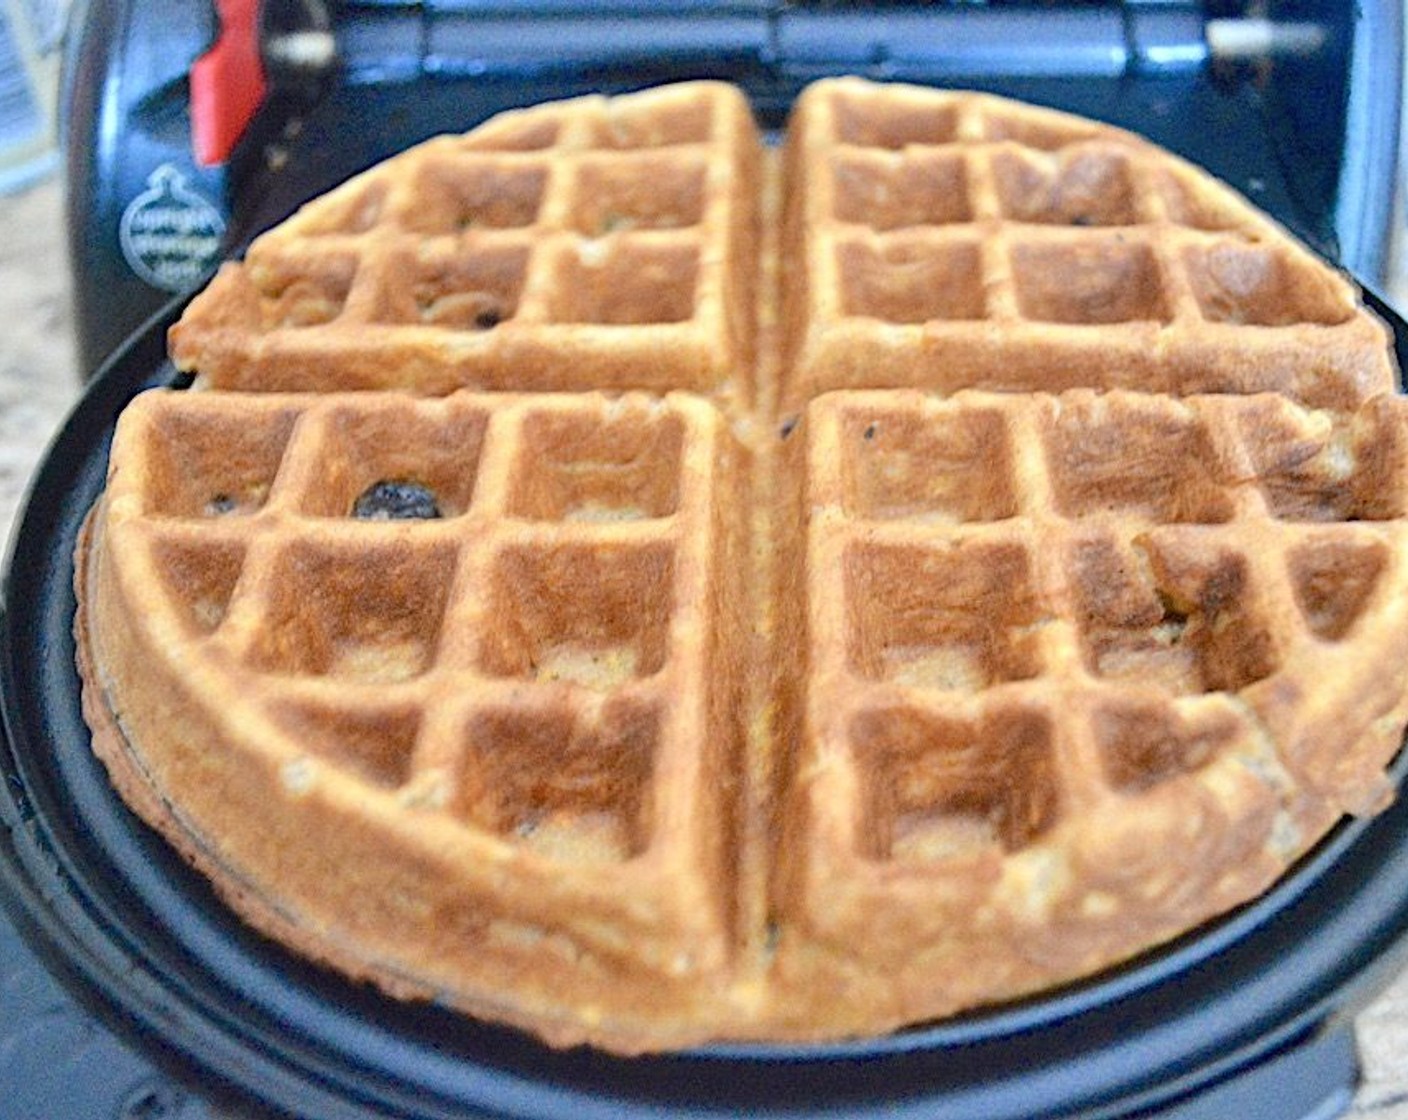 step 5 Scoop 1/4 of the batter into the waffle maker and spread it out evenly to thinly cover the whole bottom half. Close it and cook the batter for about 4-5 minutes.